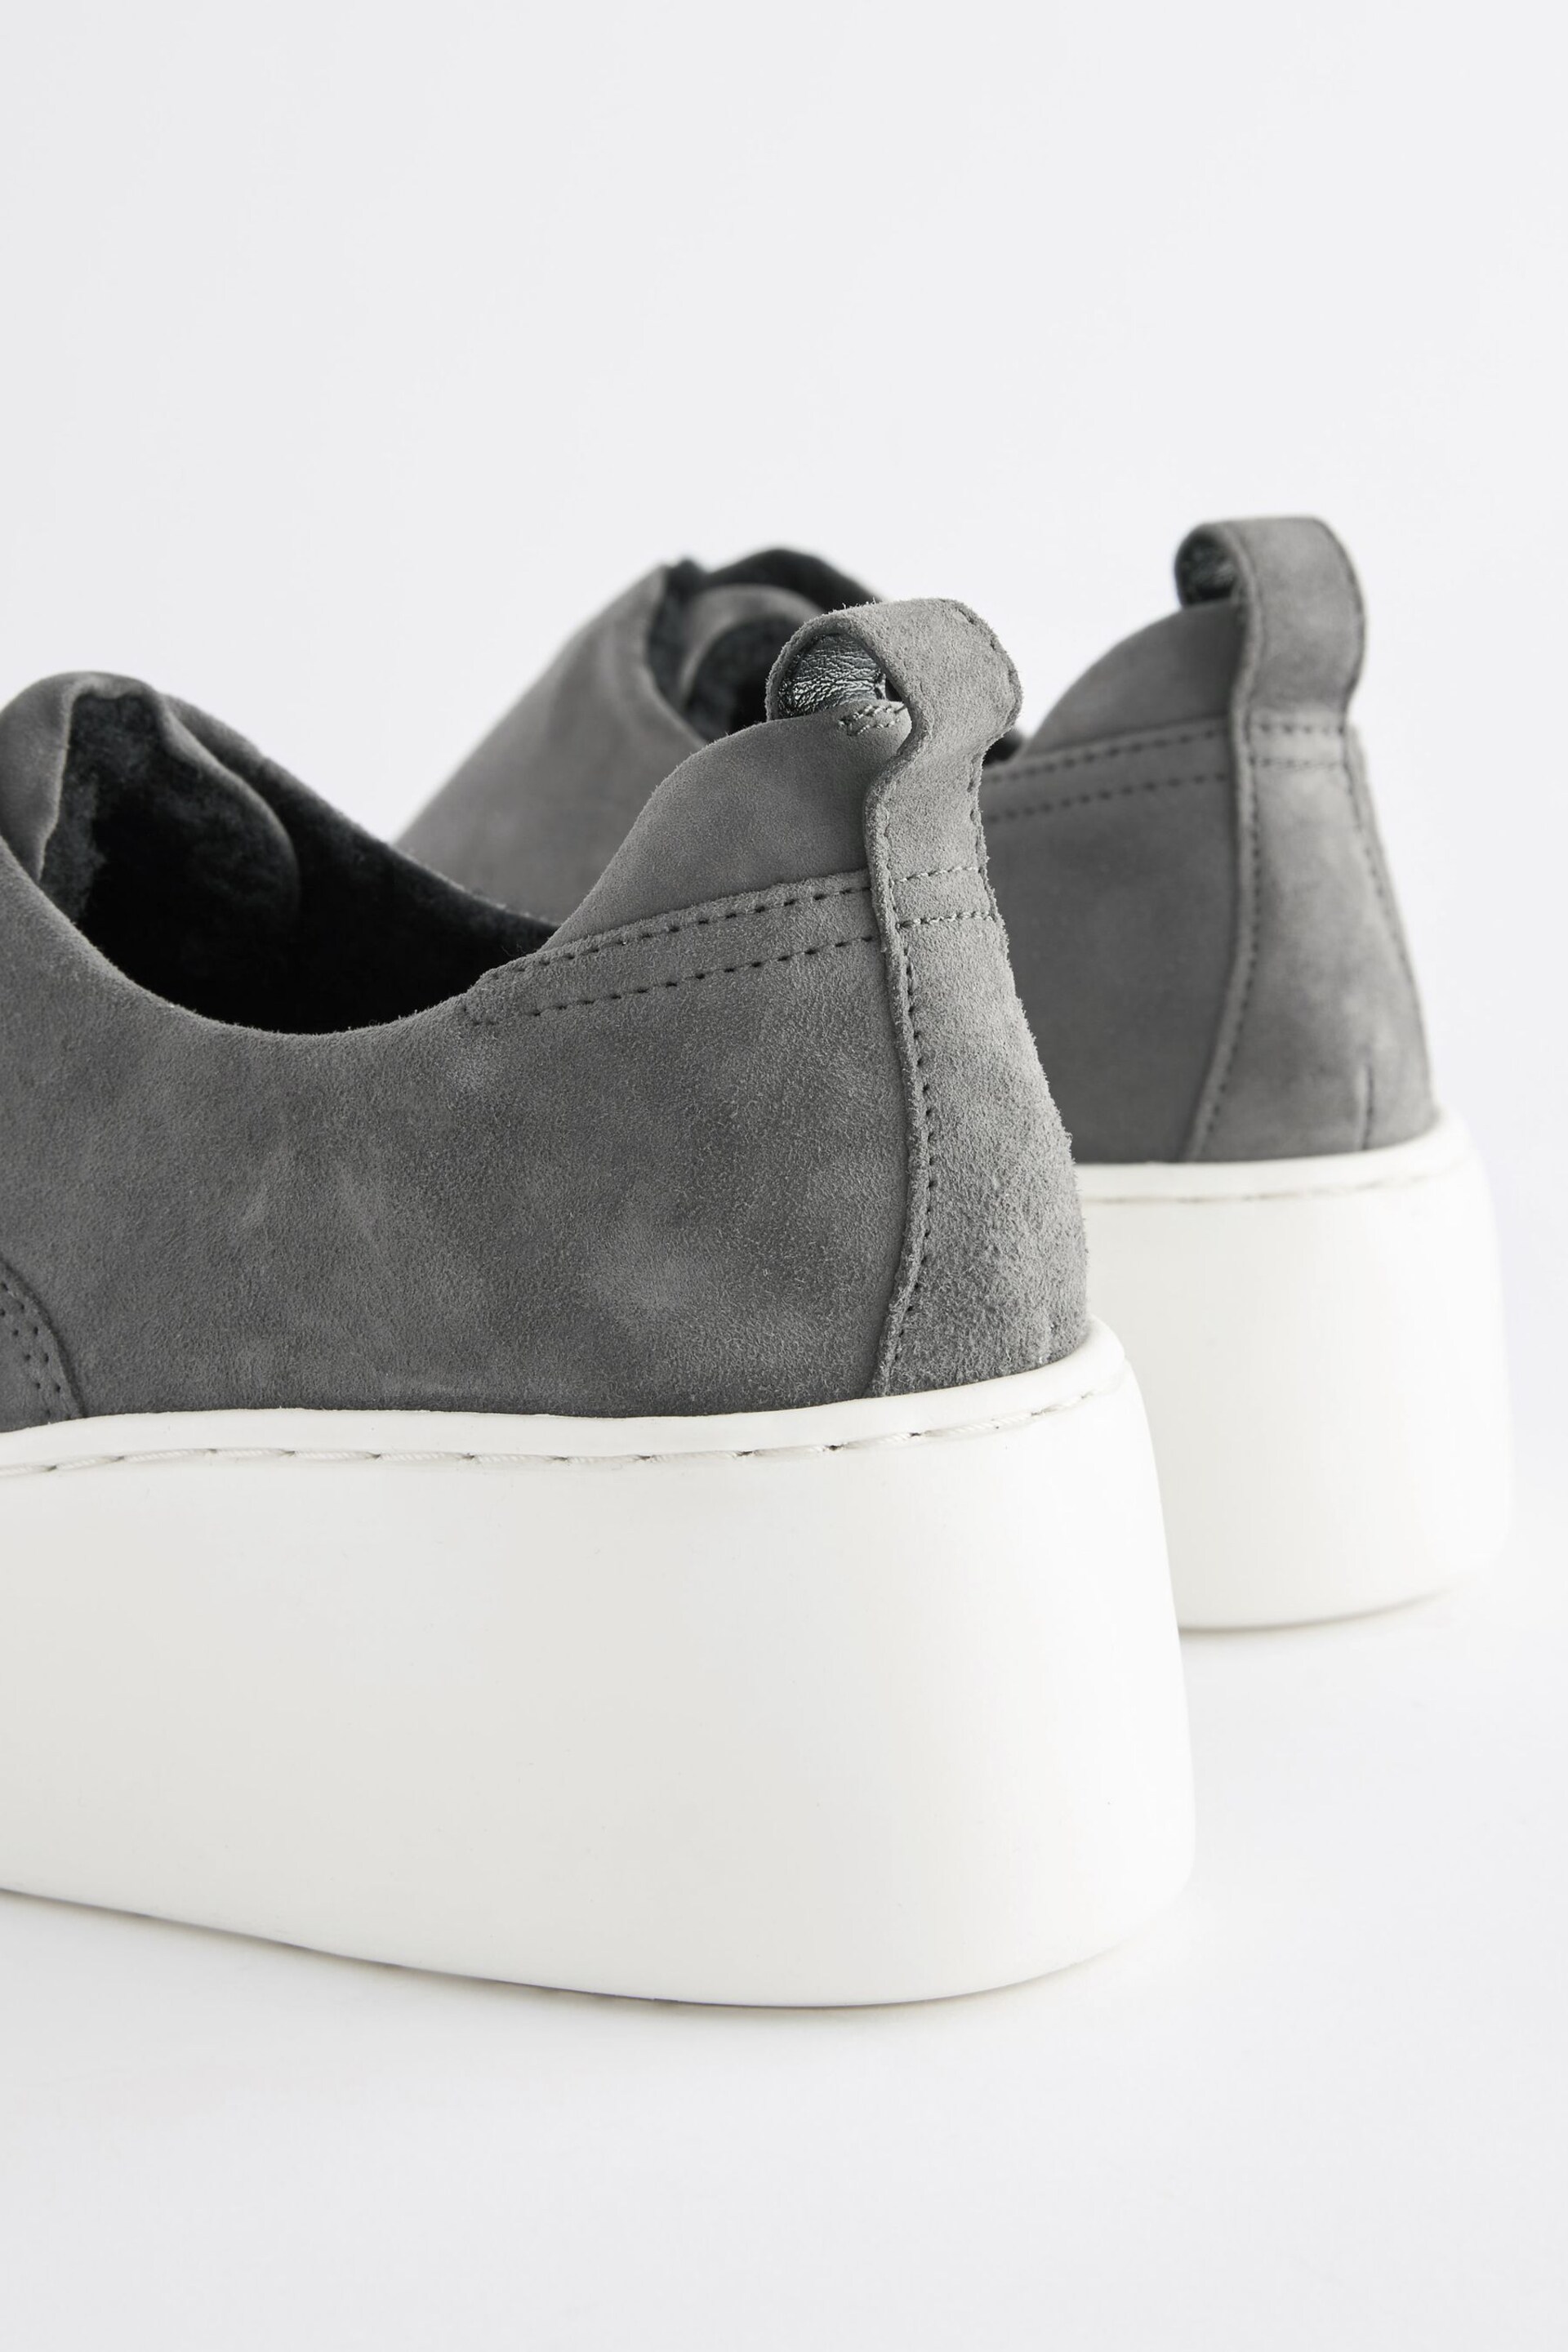 Grey Slip On Signature Forever Comfort® Leather Chunky Wedges Platform Trainers - Image 5 of 9